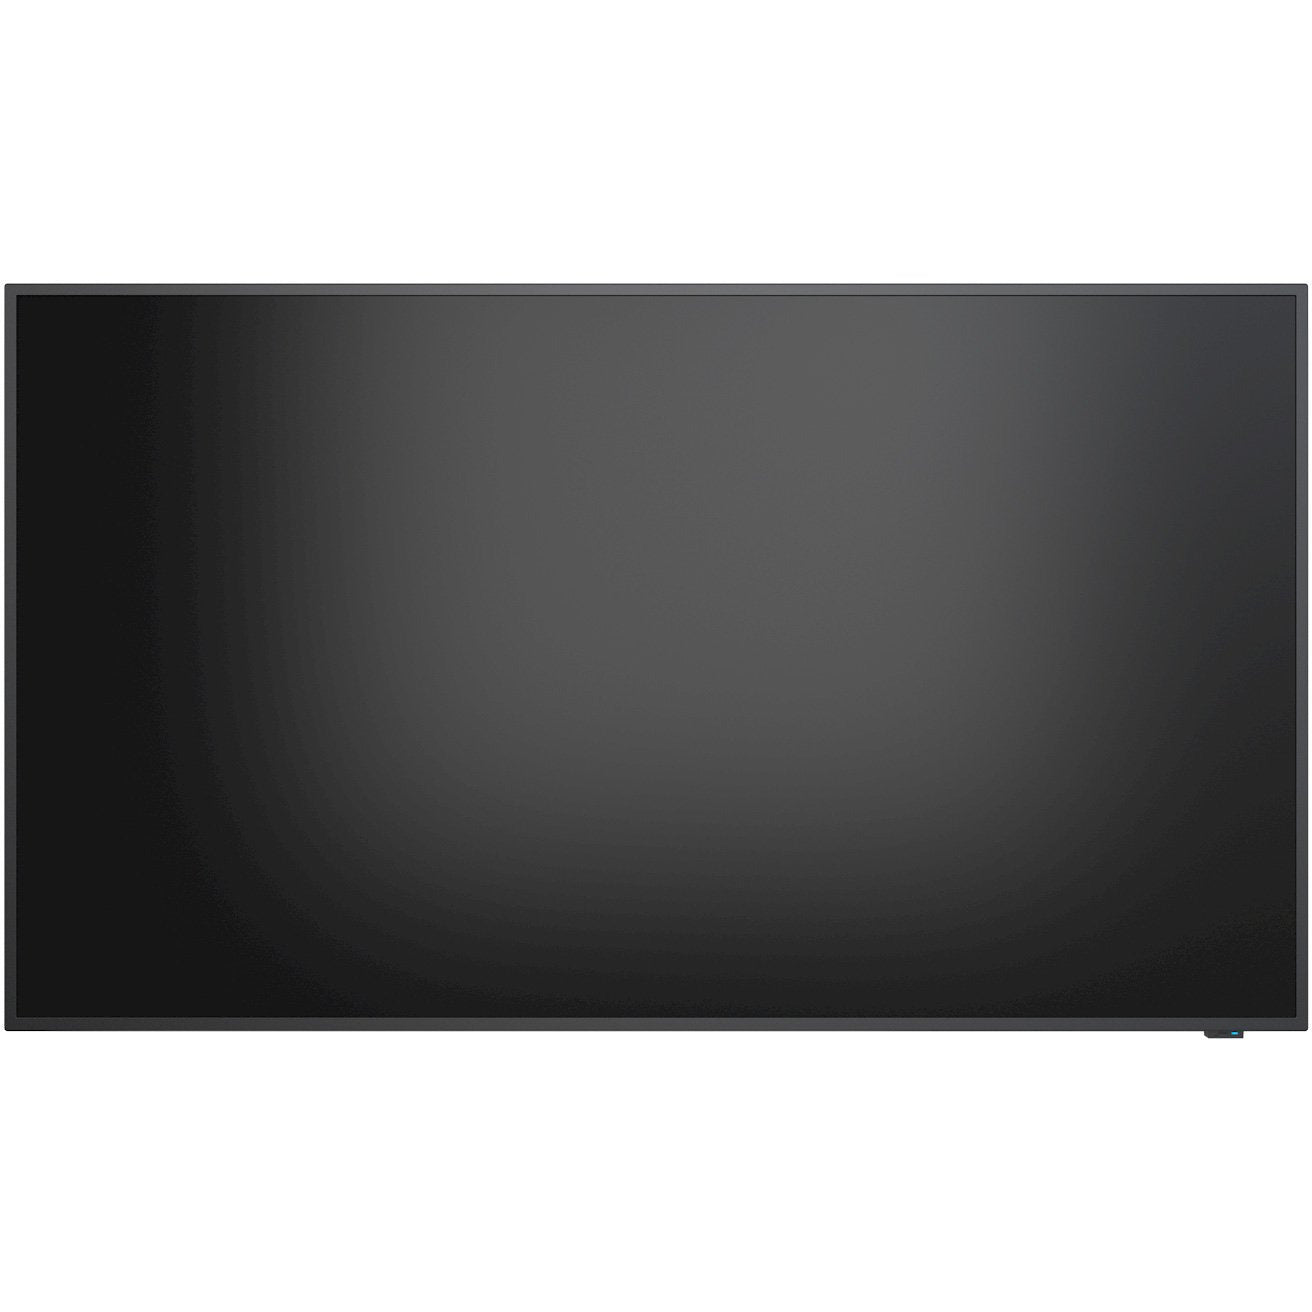 NEC MultiSync® E328 LCD 32" Essential Large Format Display